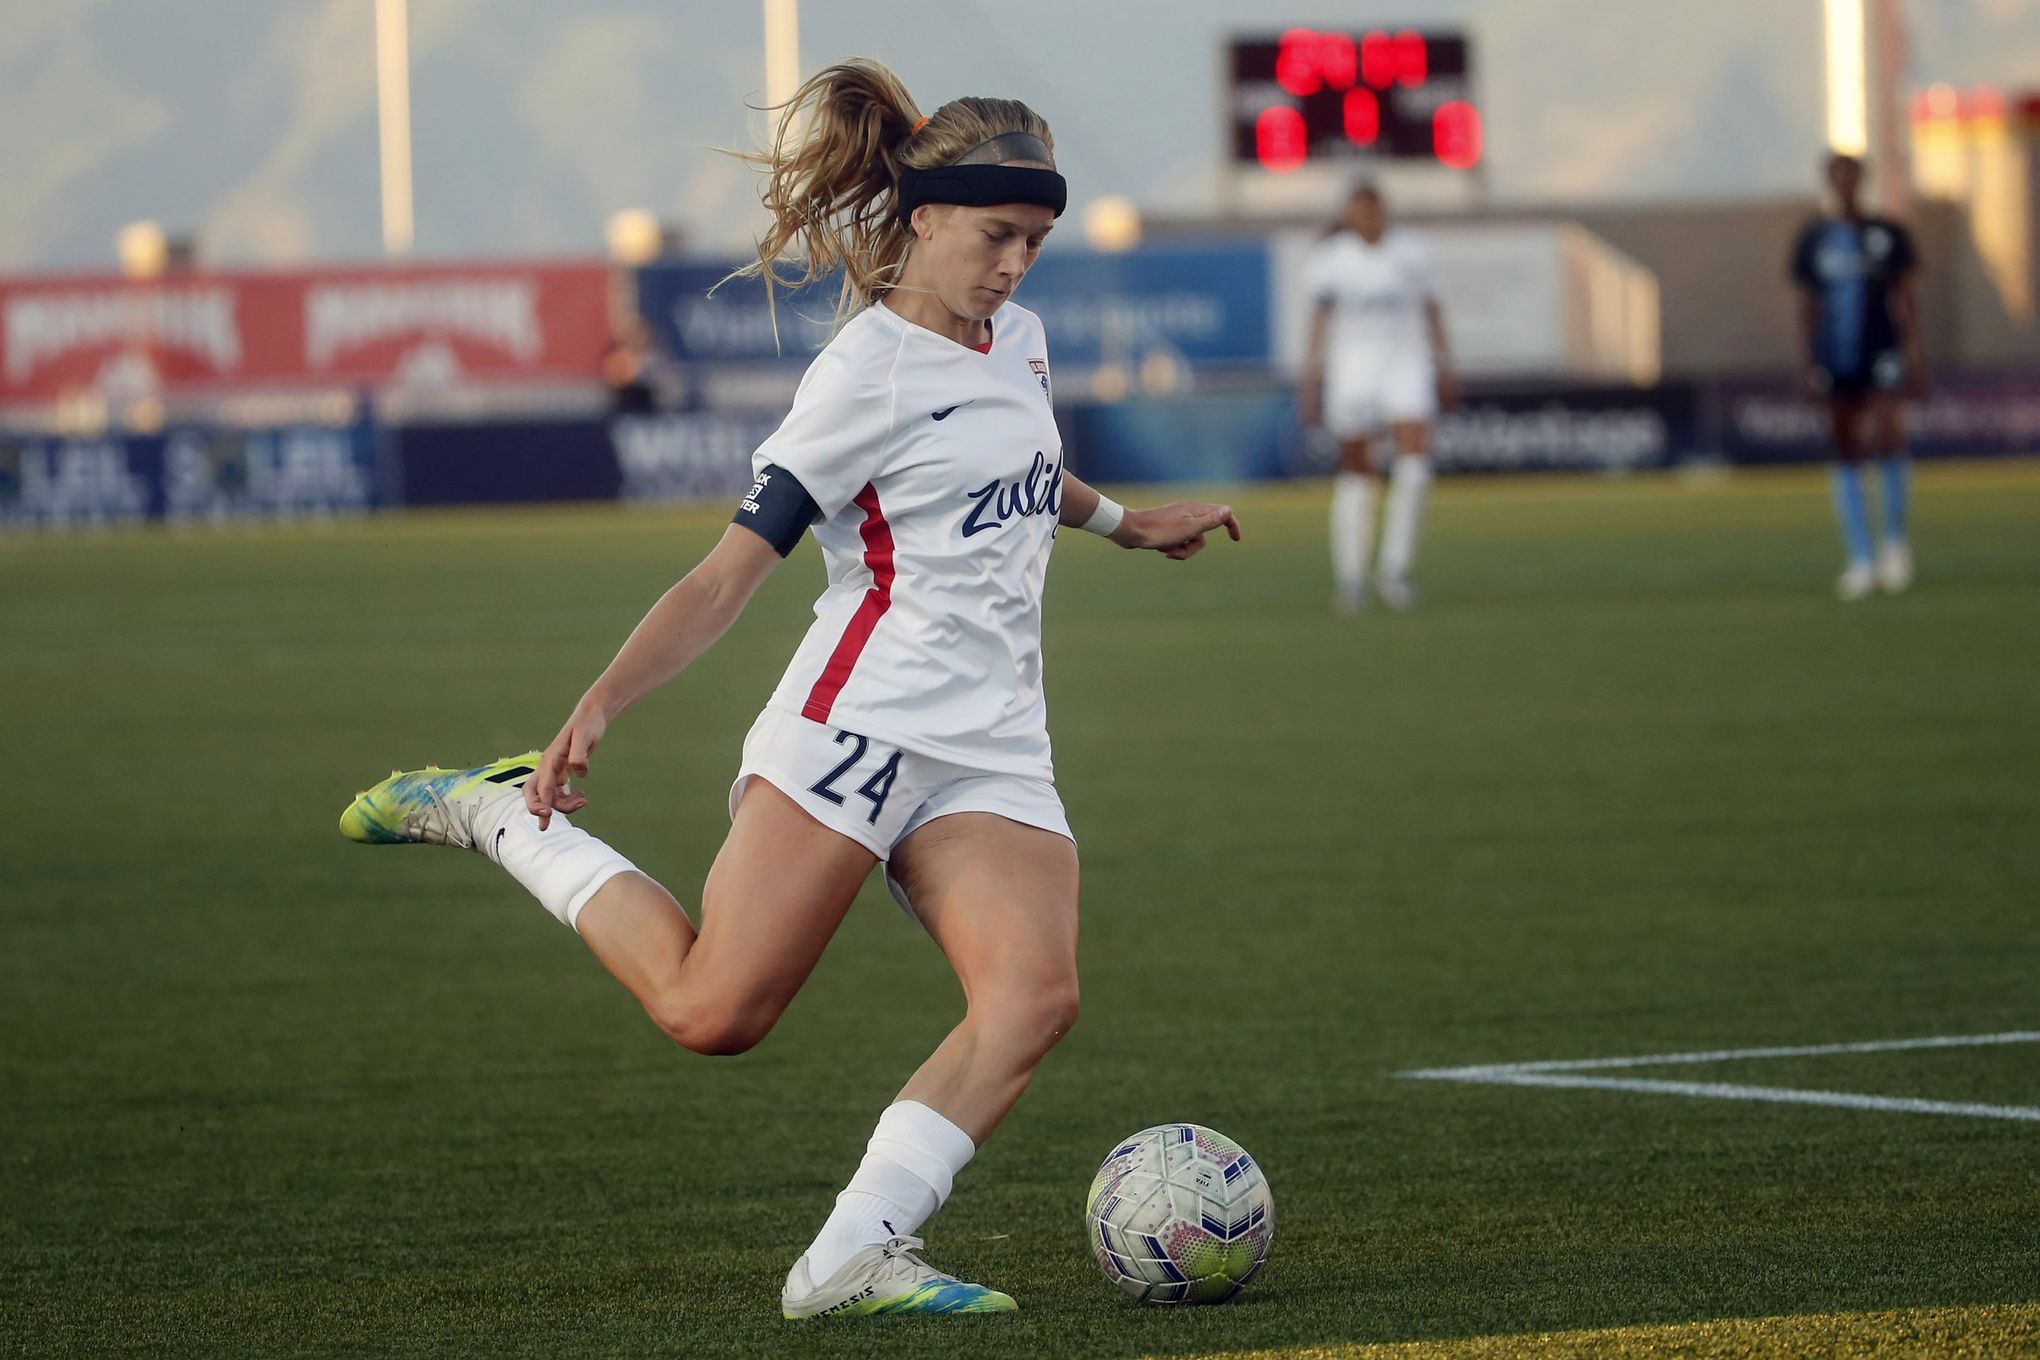 Red Stars lose their home opener 2-1, while Fire play to scoreless draw